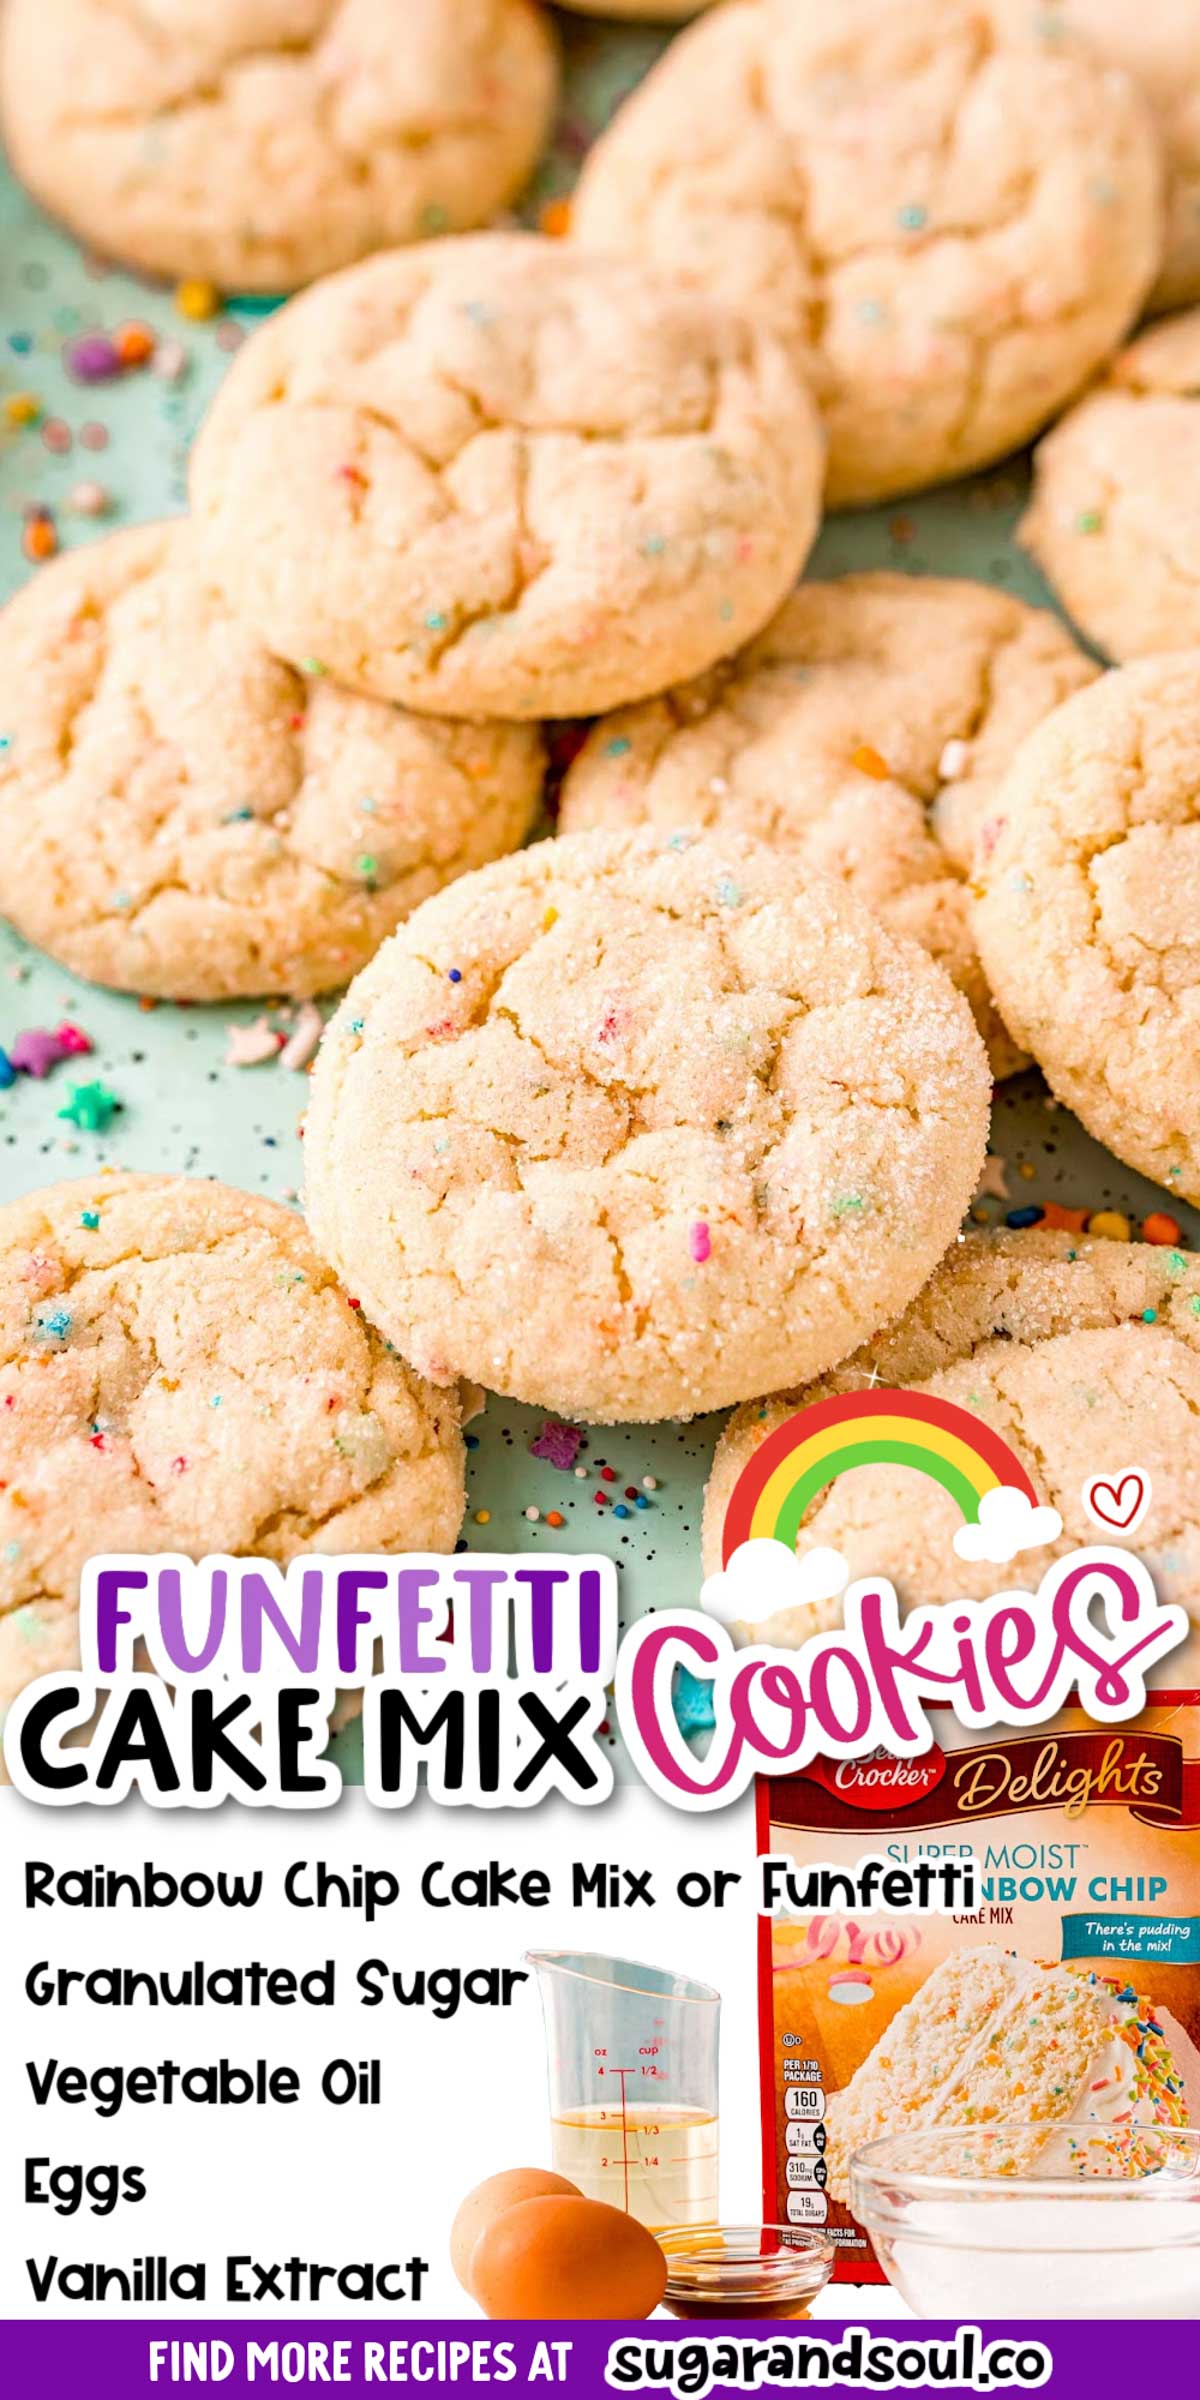 Funfetti Cake Mix Cookies is an easy 5 ingredient recipe that's baked to soft and chewy perfection for a deliciously addictive dessert! via @sugarandsoulco